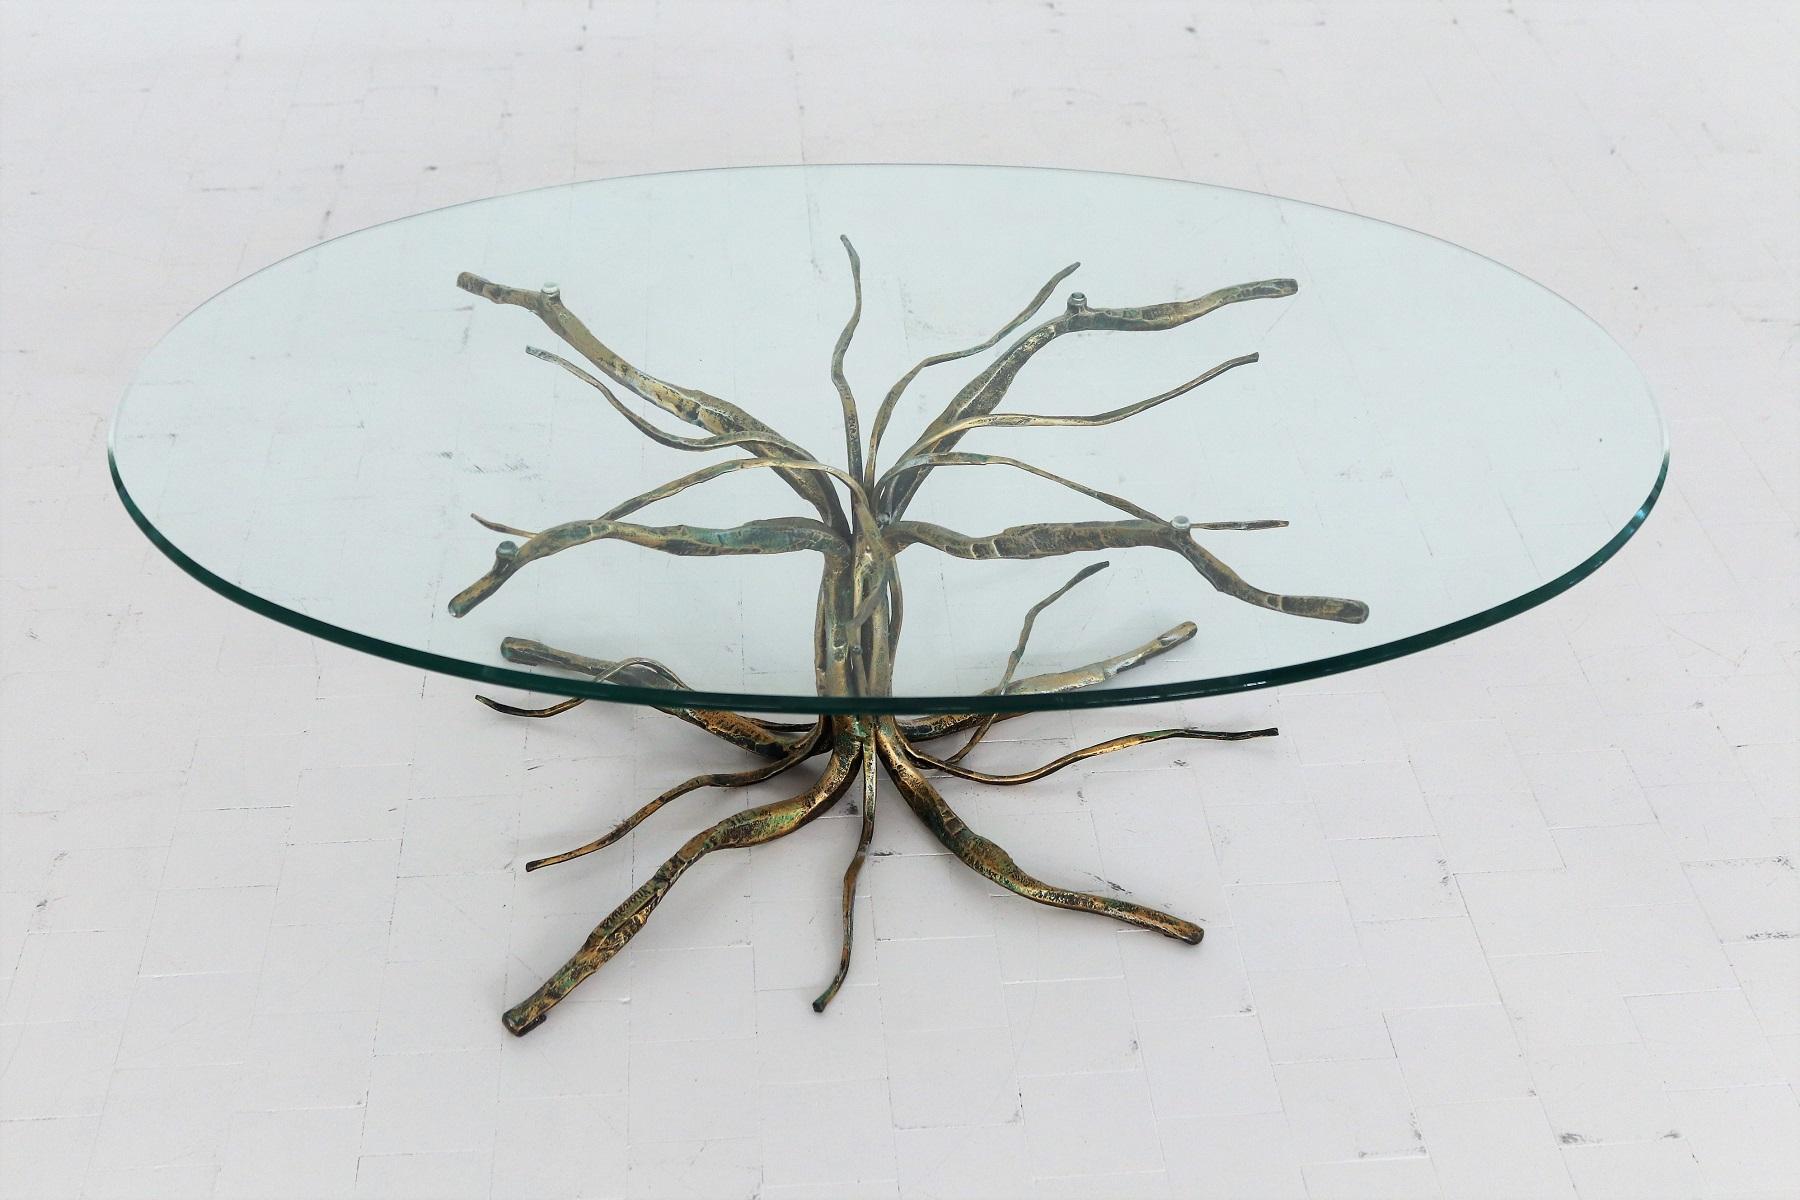 Gorgeous coffee table handcrafted by Italian Artist and Sculptor Salvino Marsura, who passed away in May 2020.
The coffee table shows an amazing tree in heavy gilt wrought iron.
On top is the original crystal glass top with cut edge.

The table is